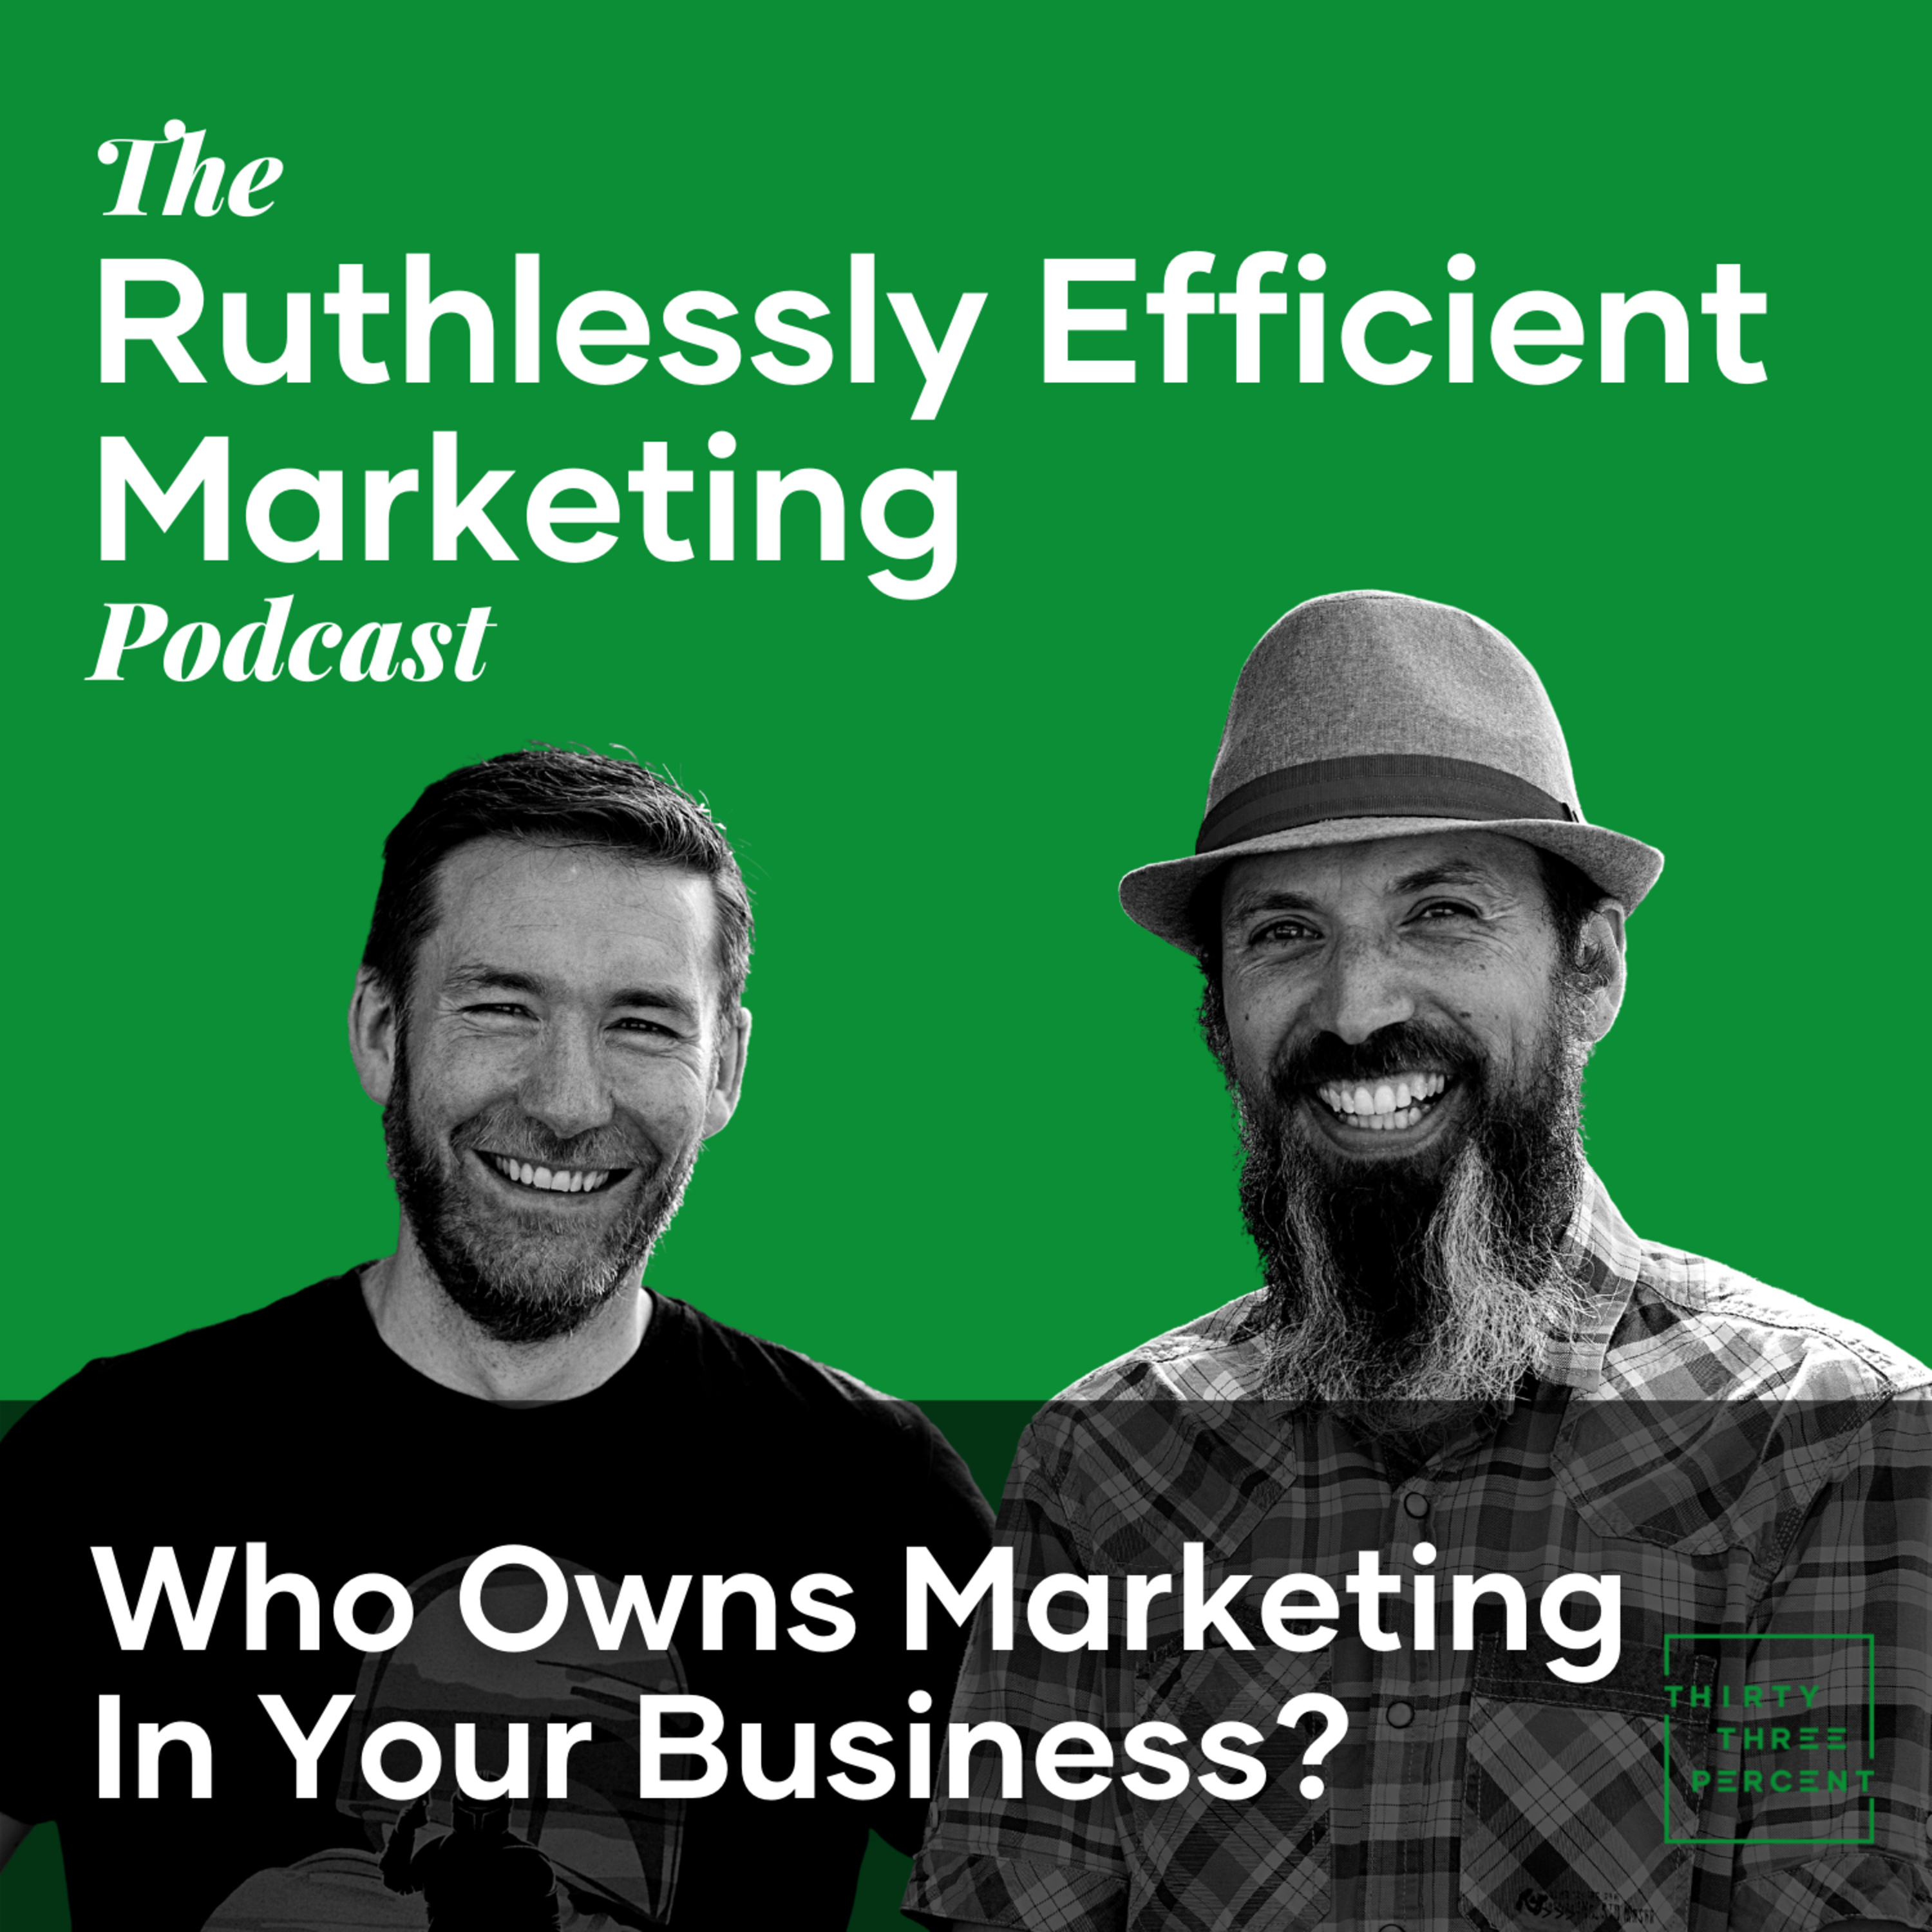 Artwork for podcast The Ruthlessly Efficient Marketing Podcast